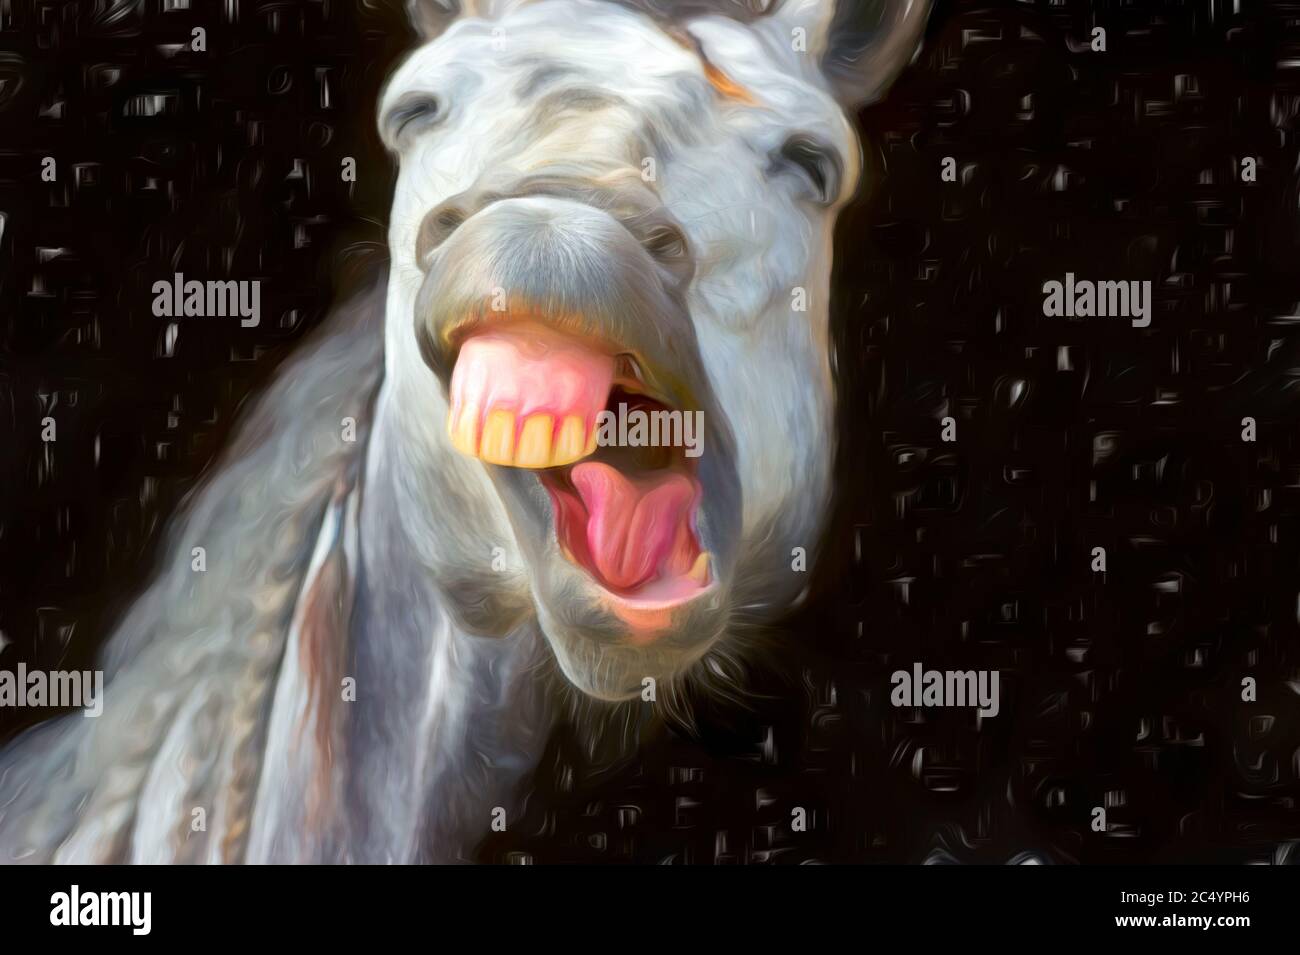 A Funny Silly Looking Horse is Laughing Out loud Stock Photo - Alamy